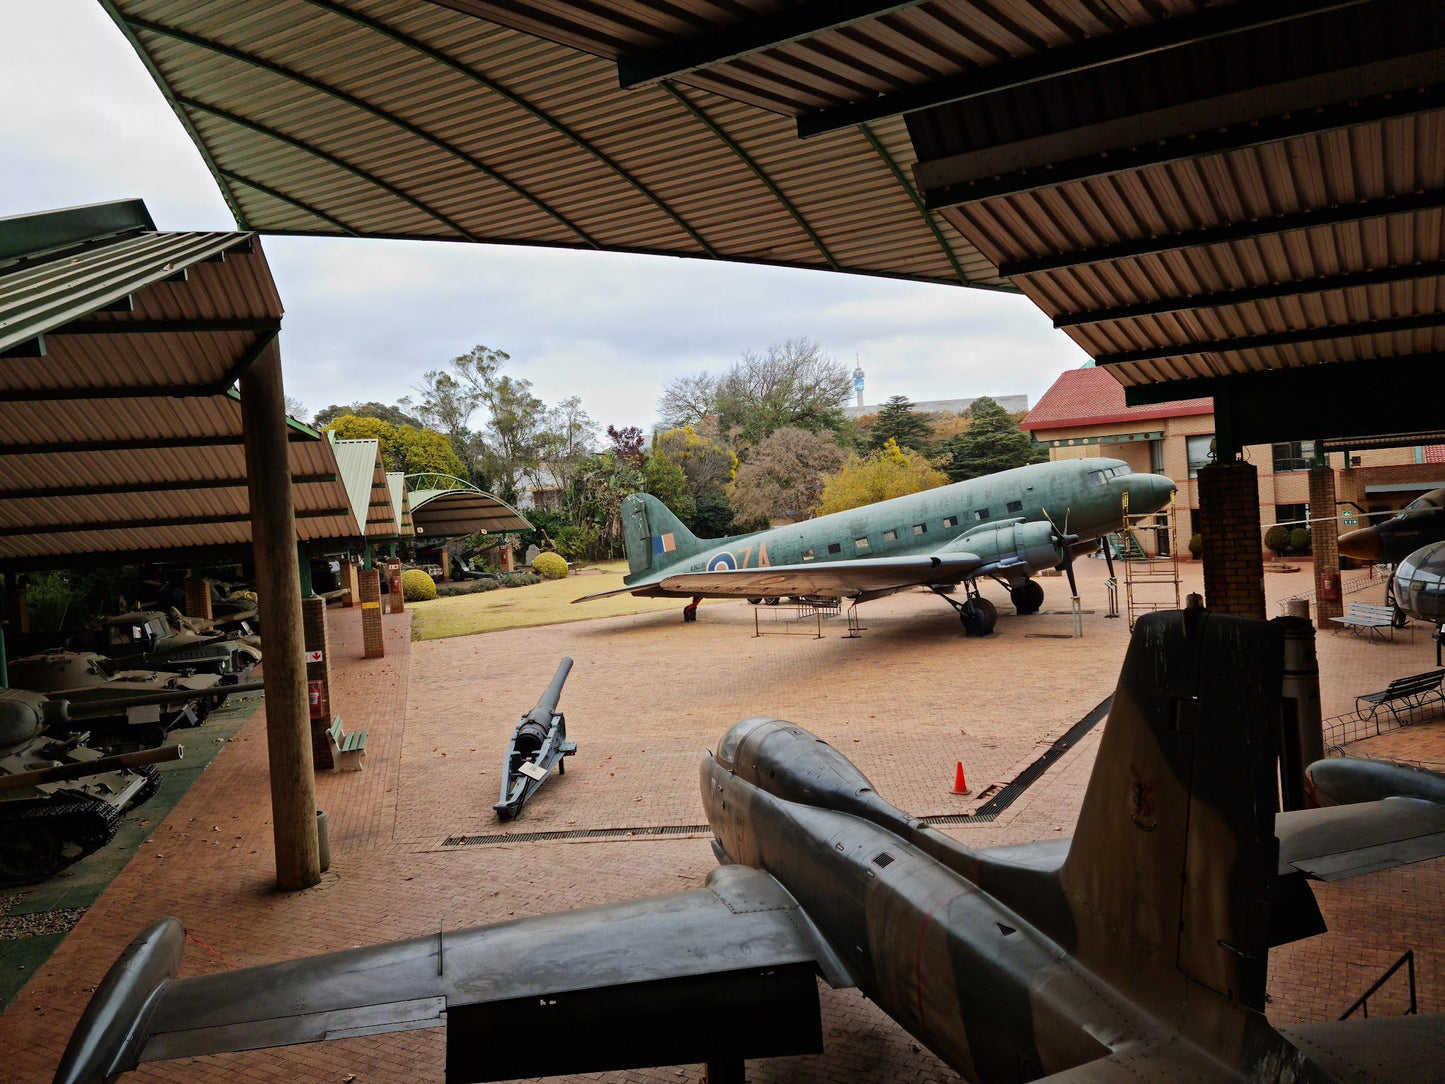  South African National Museum of Military History